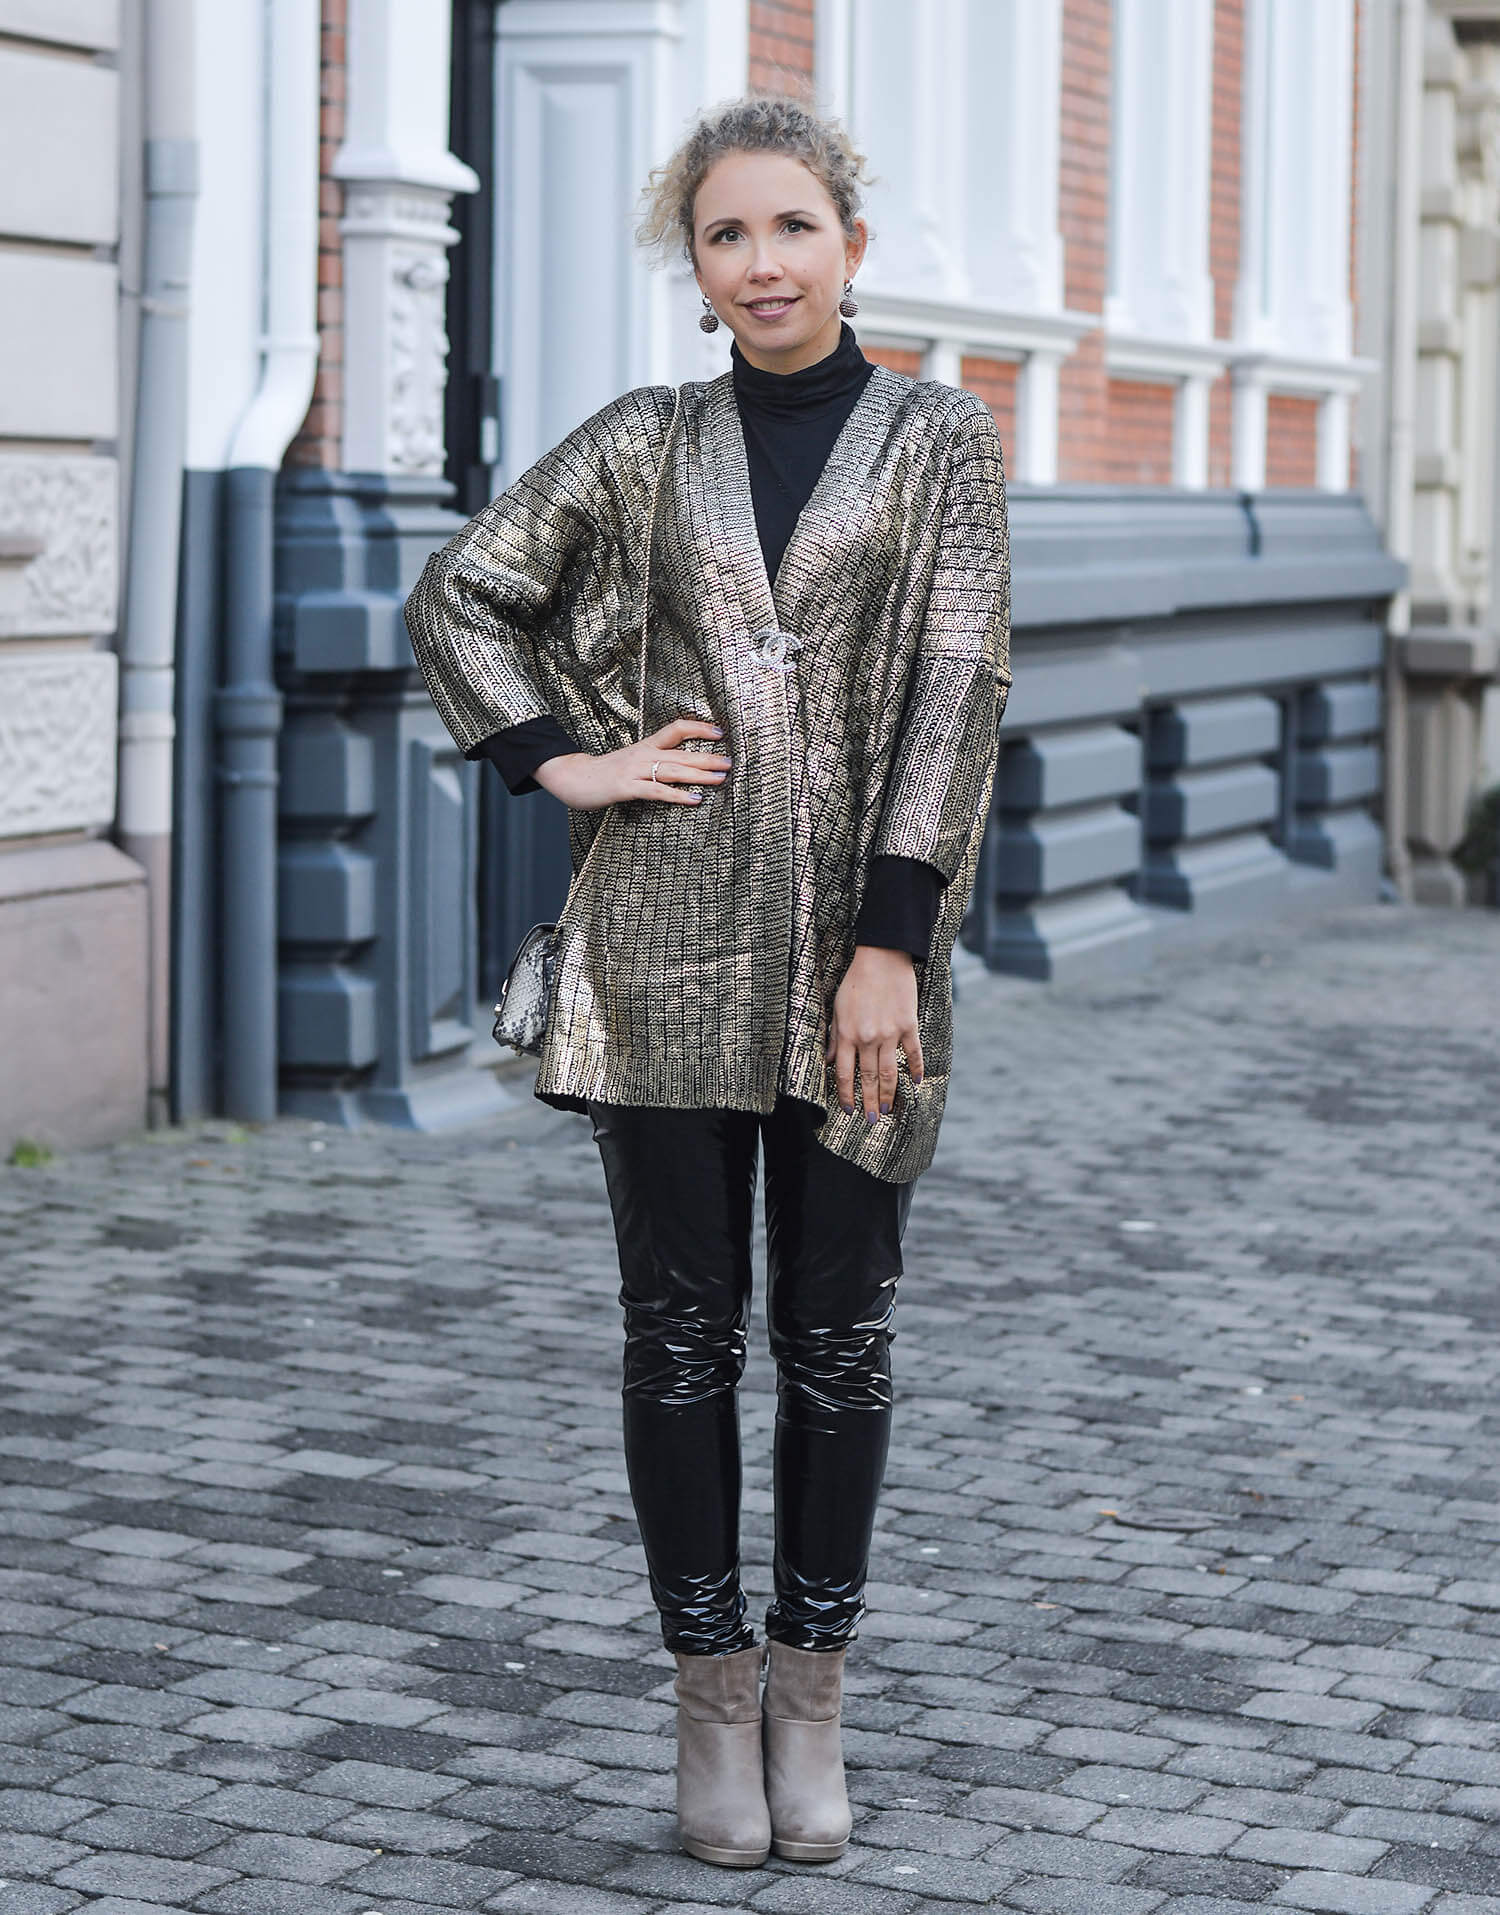 Kationette-fashionblogger-outfit-Outfit-Black-and-Gold-Golden-Knit-and-Vinylpants-streetstyle